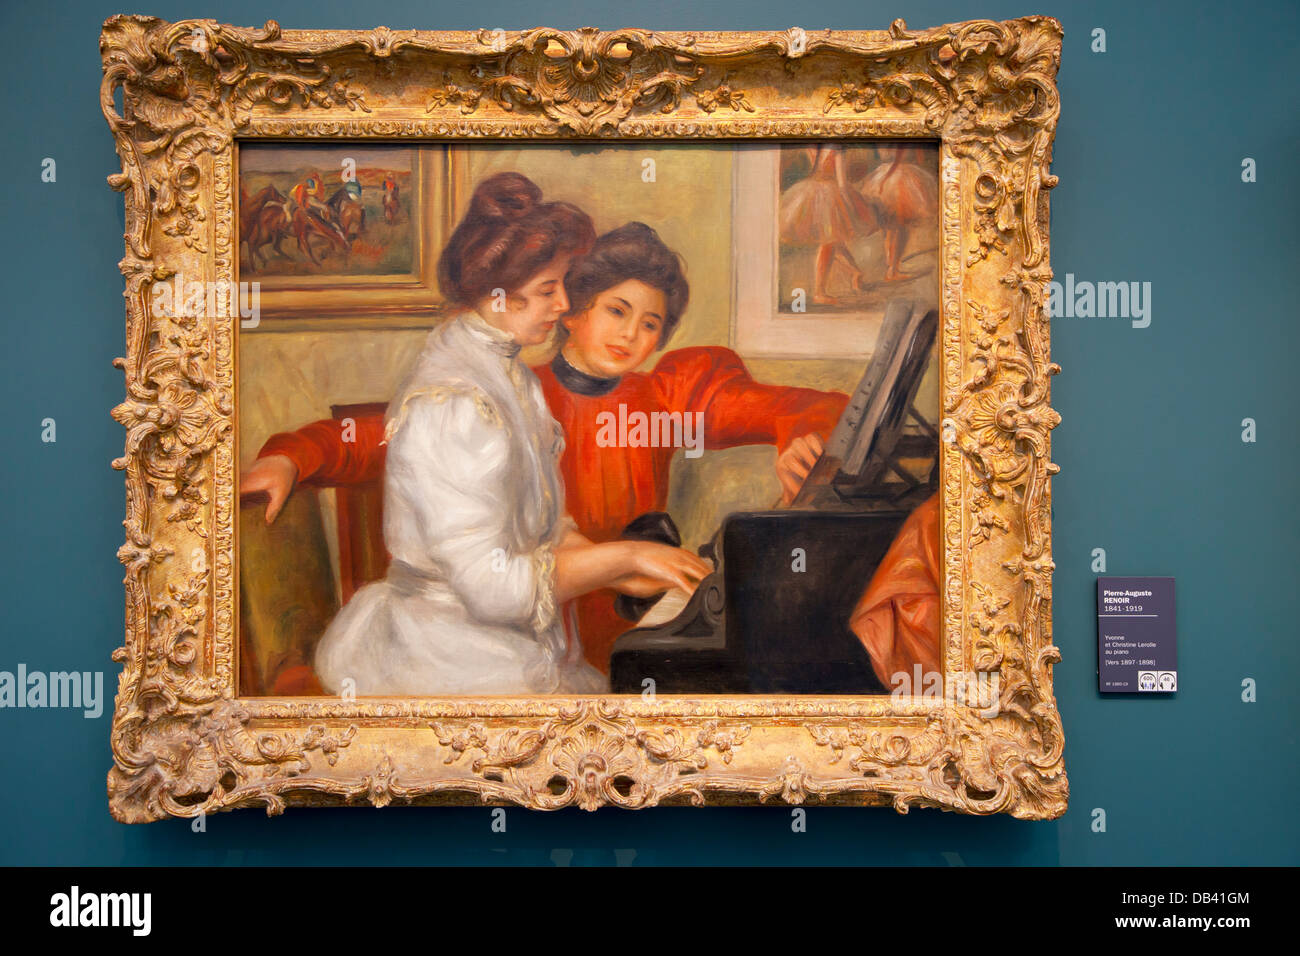 Yvonne et Christine Lerolle au Piano, painting by Renoir on display at  Musee l'Orangerie, Paris France Stock Photo - Alamy